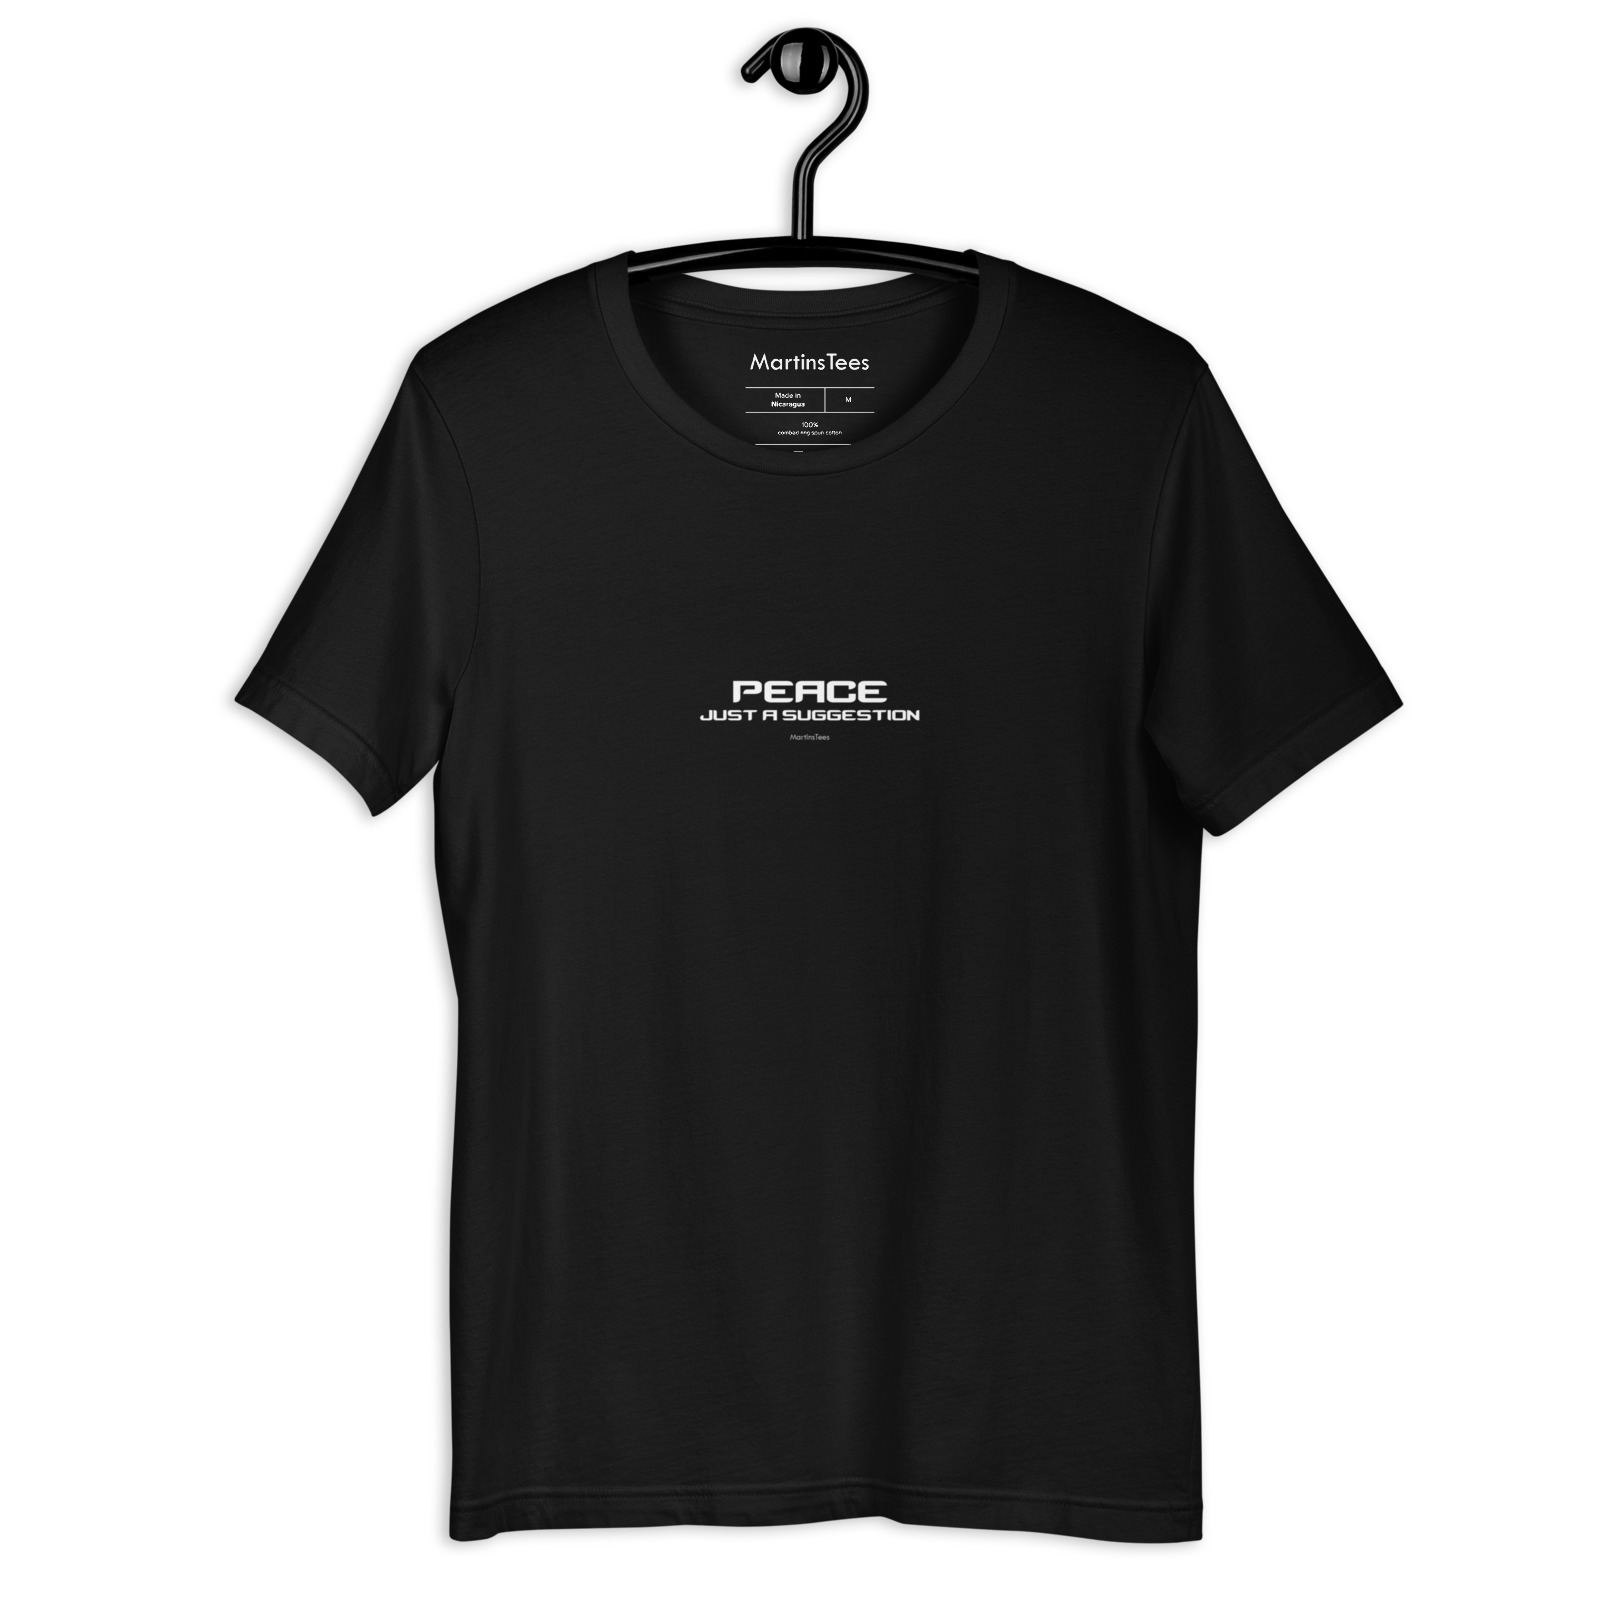 T-shirt: PEACE - JUST A SUGGESTION